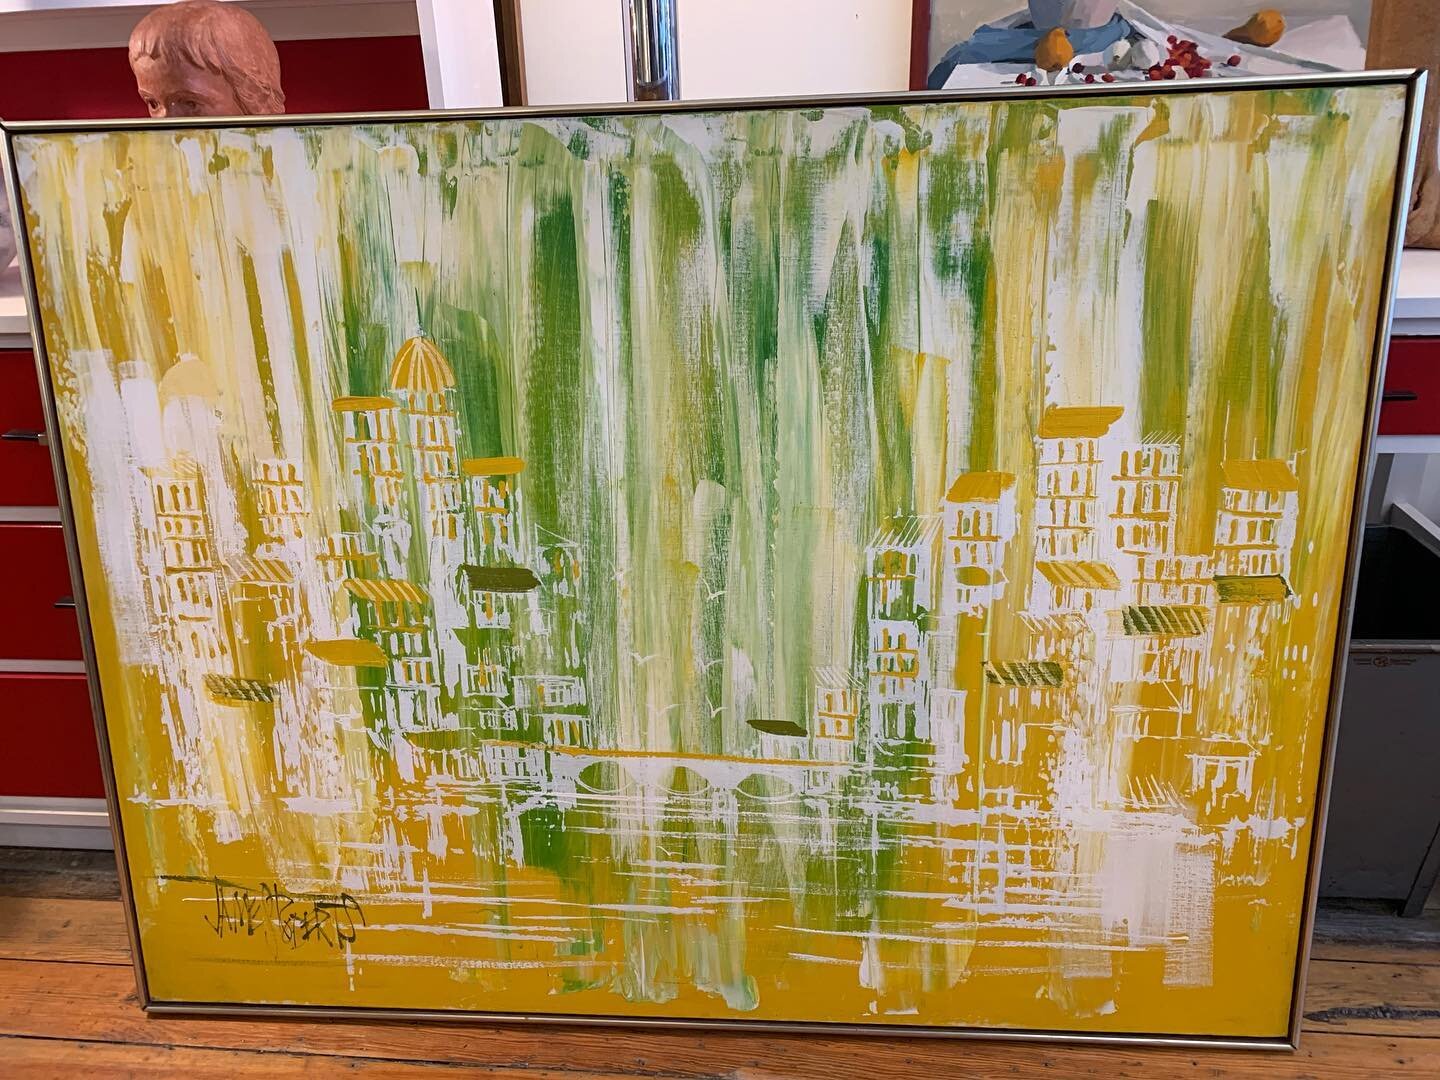 Excellent large abstract cityscape on canvas signed James Roberts . 49&rdquo; x 37&rdquo; we love the acidy/citrusy colors on this one. $295. #vintagedesign #interiordesign #mcmpainting #60sdesign #vintageshop #genevany #morganlaurent #jamesrobertspa